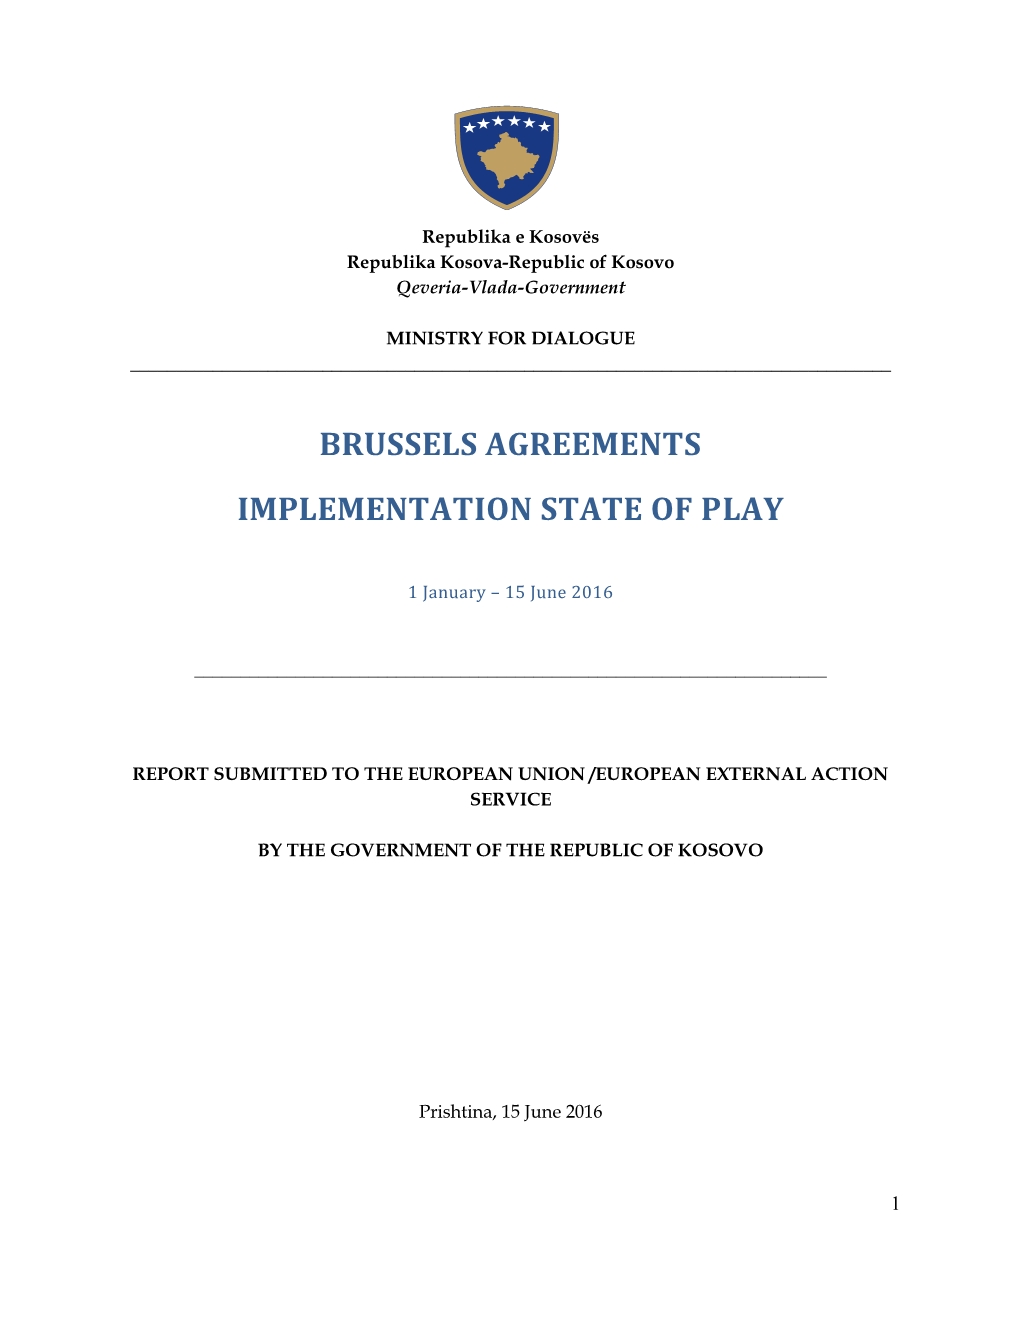 Brussels Agreements Implementation State of Play